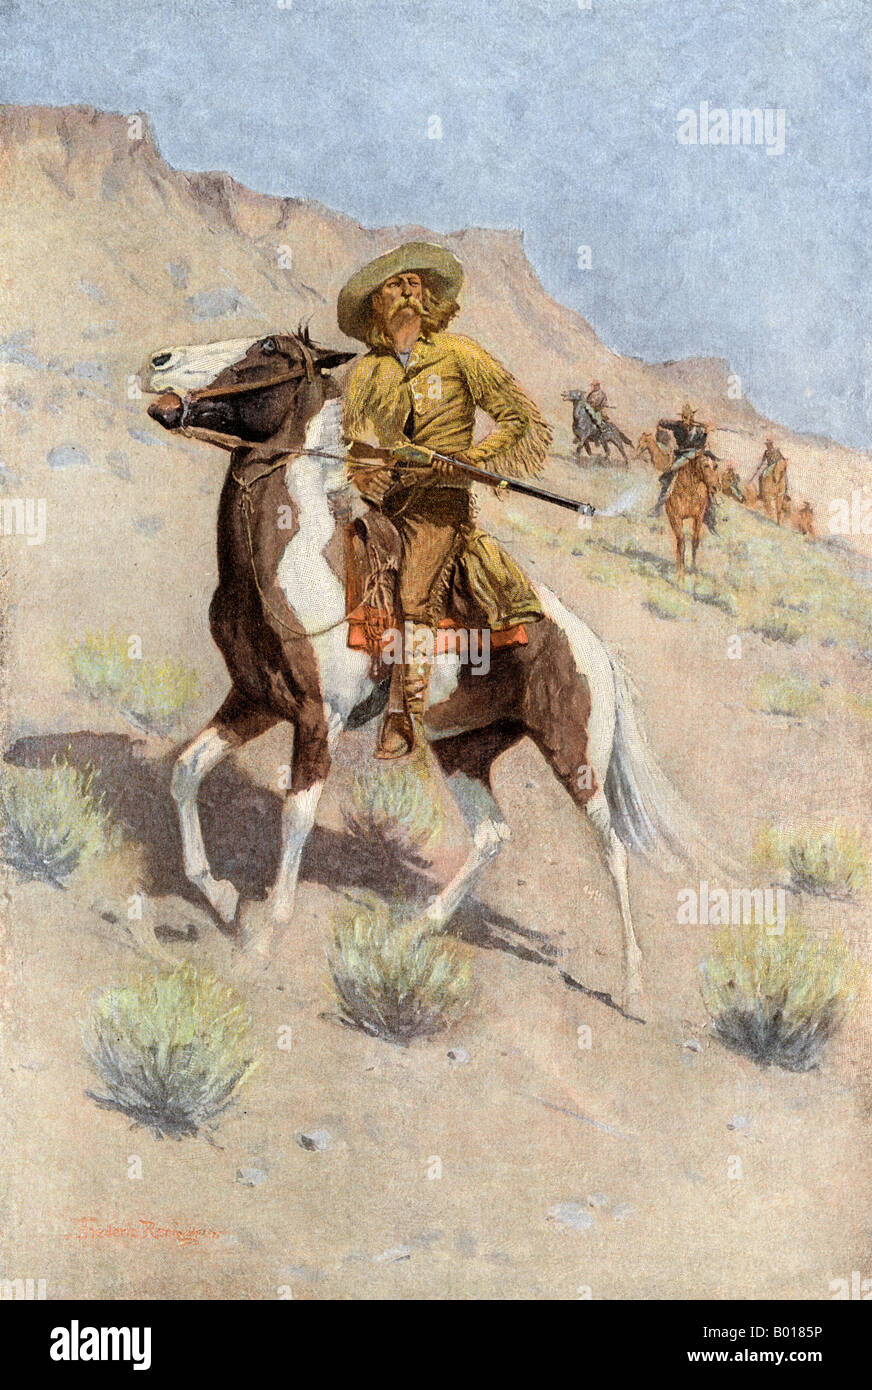 The scout a frontiersman employed by US Army in the opening of the west. Color halftone of a Frederic Remington illustration Stock Photo